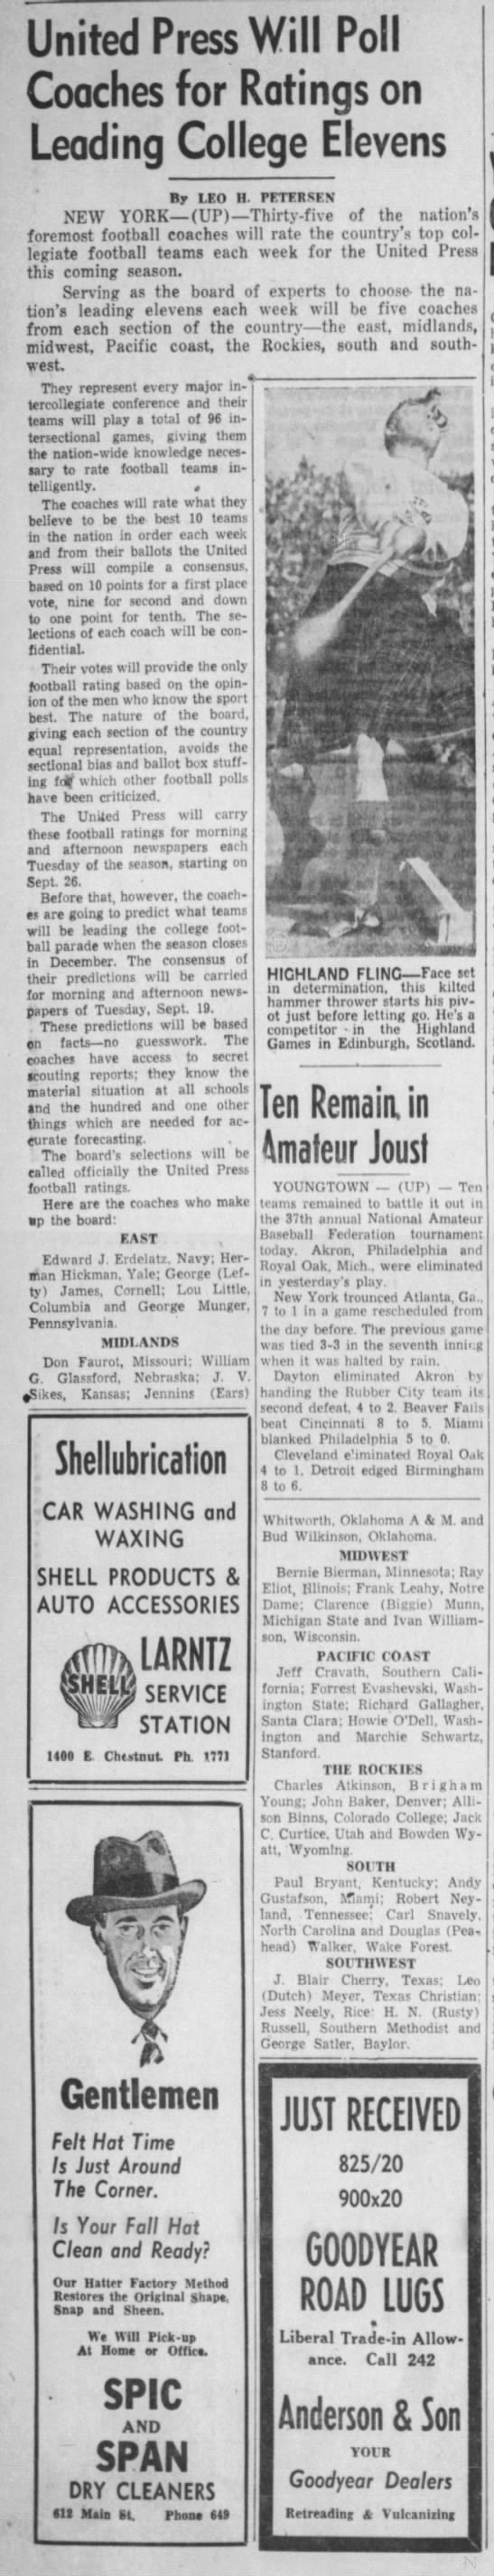 1950 UP Coaches Poll announcement - 